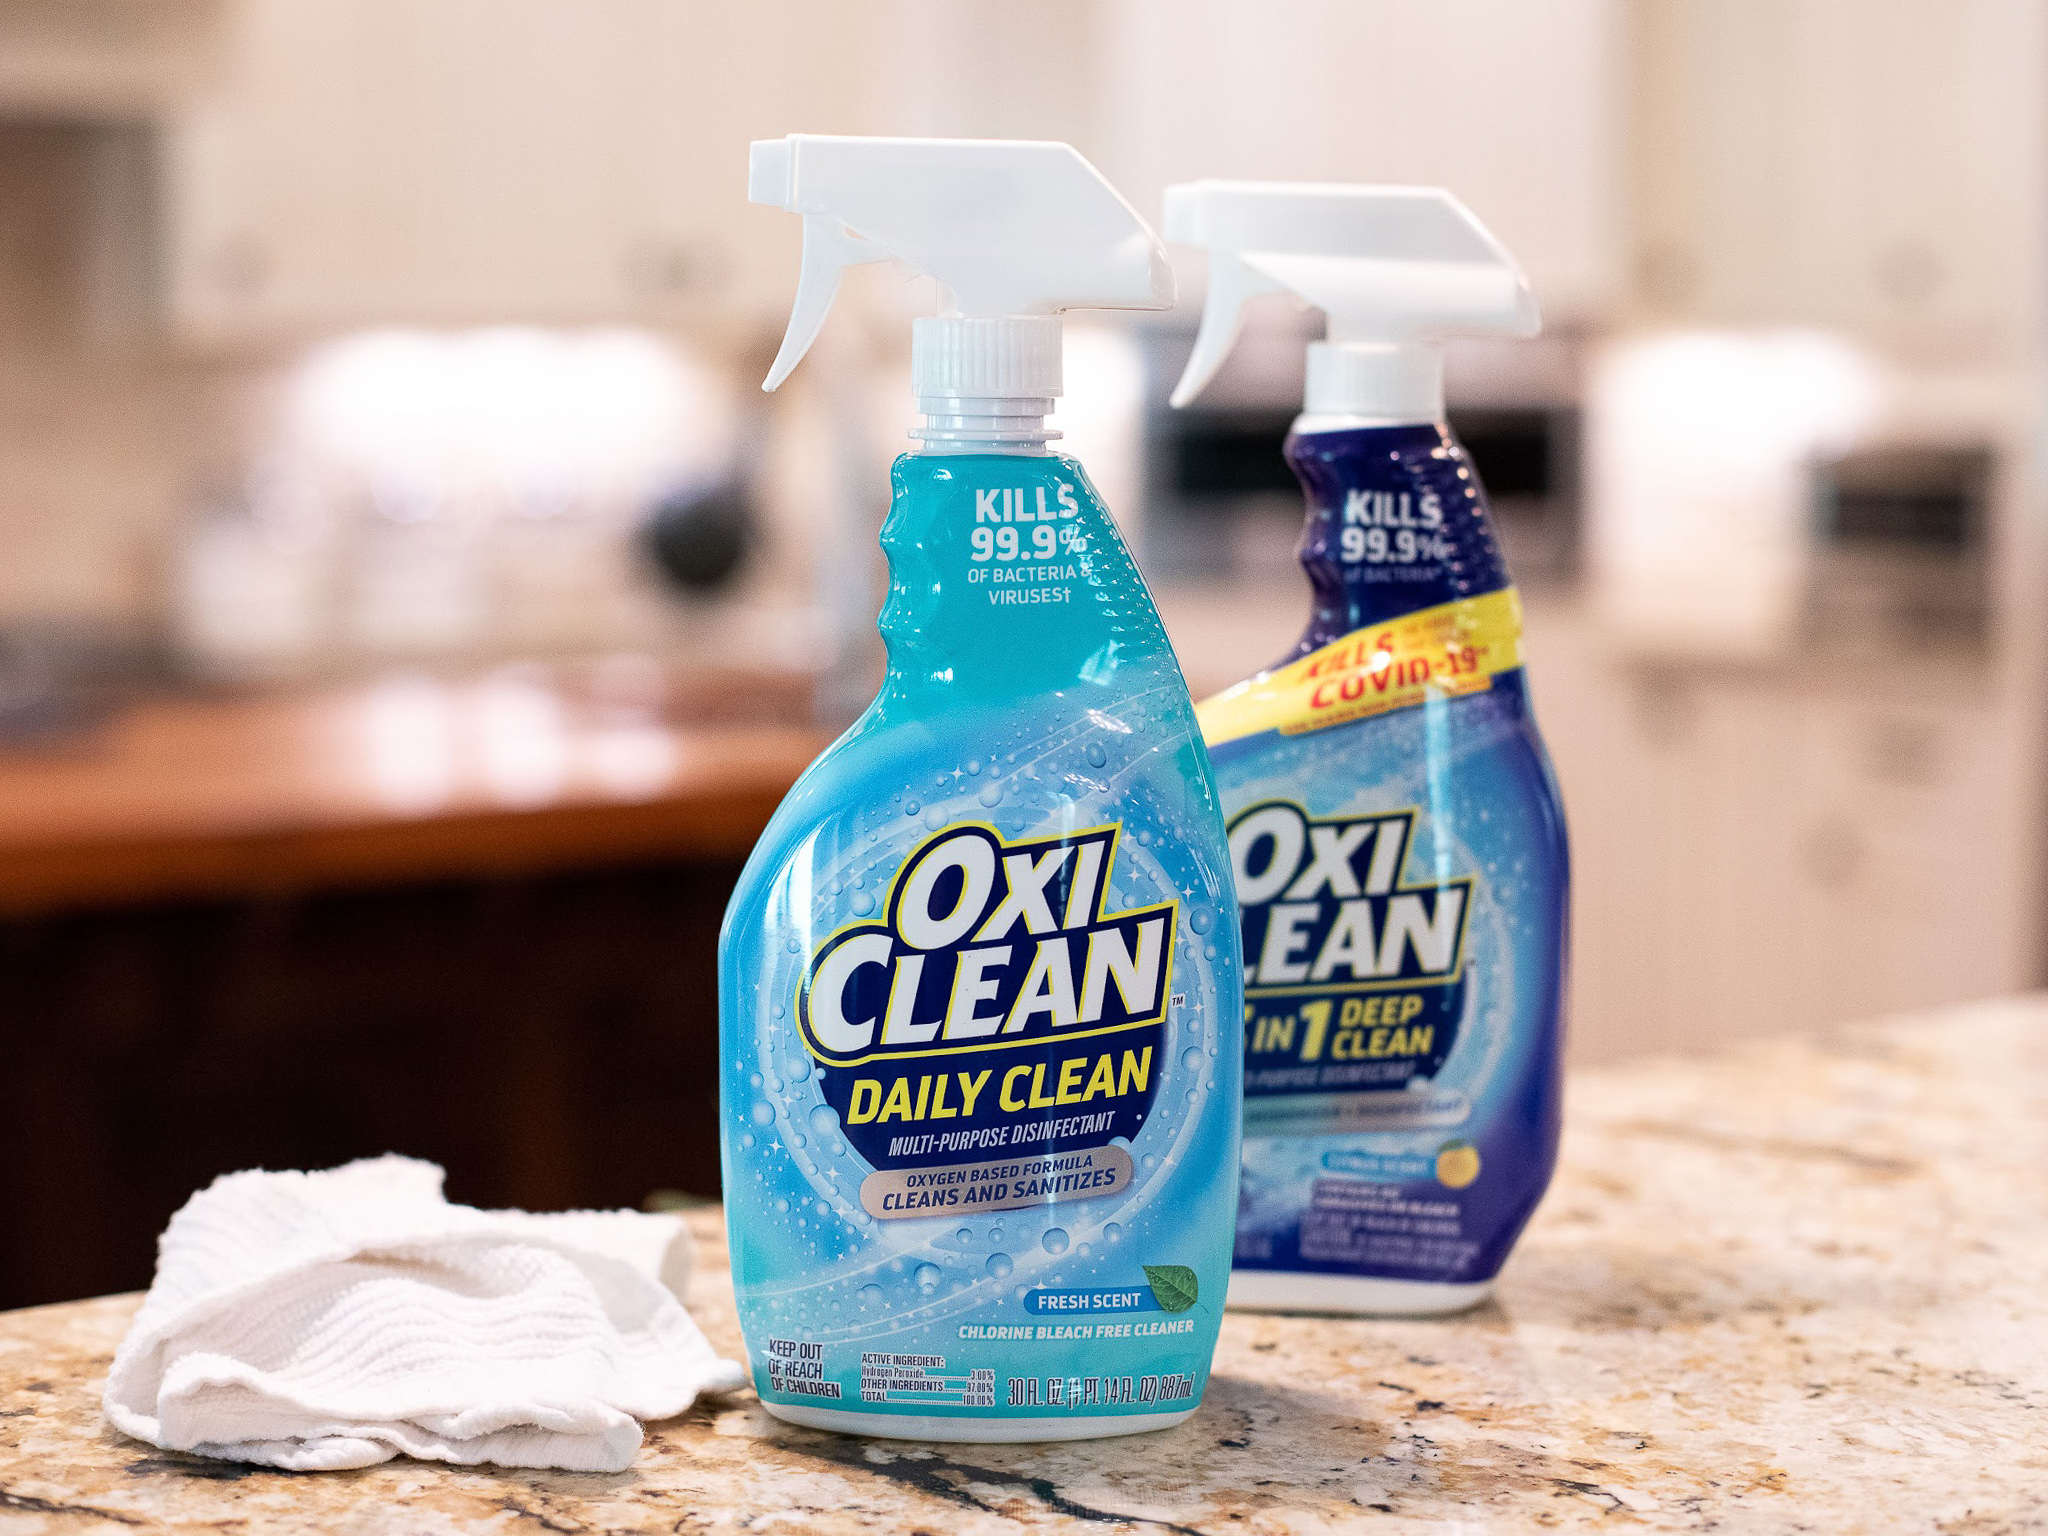 New OxiClean™ Multi-Purpose Disinfectant Cleaners Are Now Available At Publix - Clean & Disinfect Household Surfaces With The Power Of OxiClean™ on I Heart Publix 2